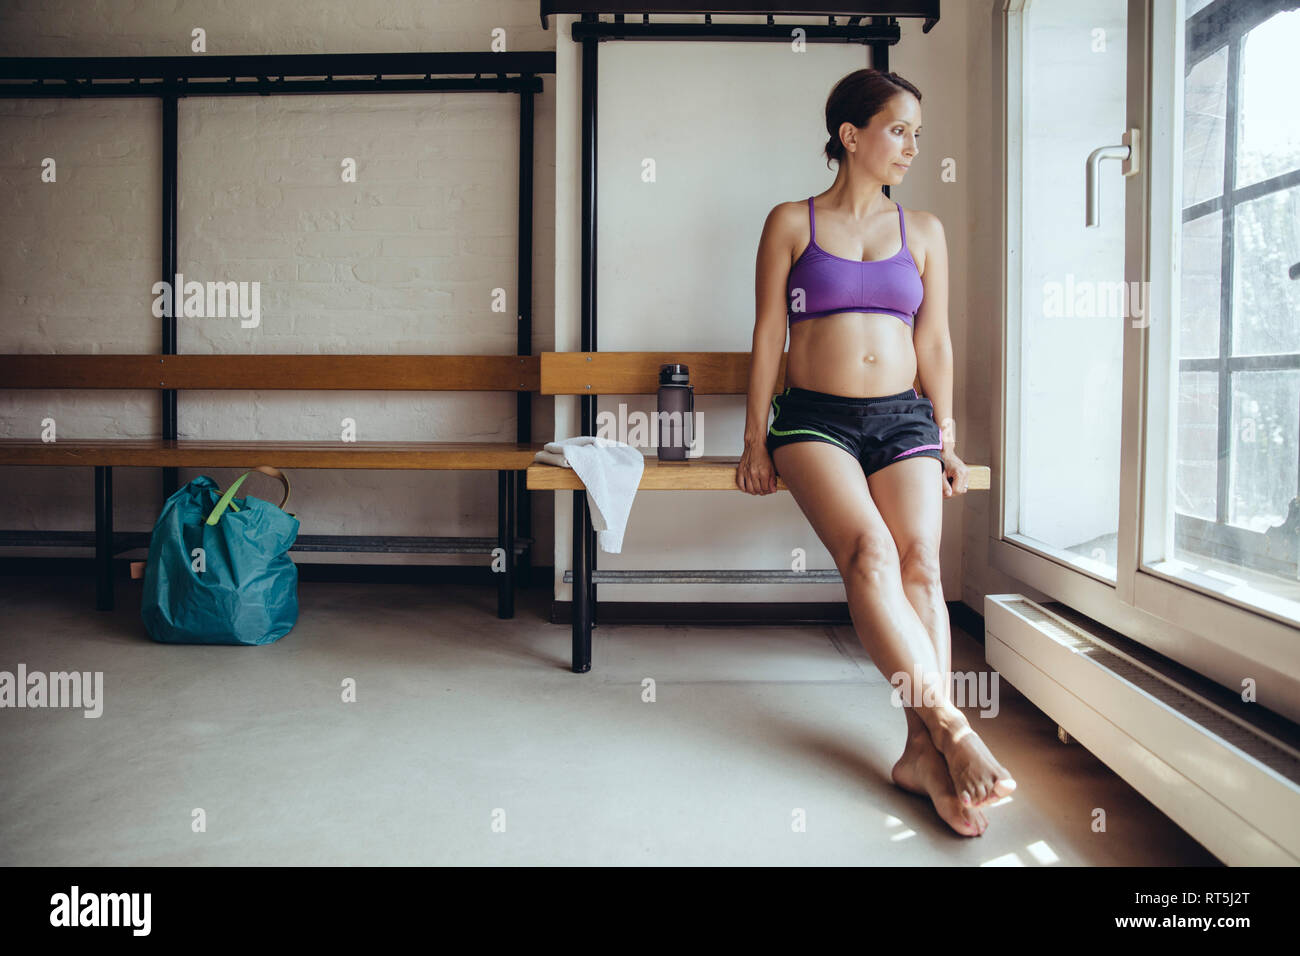 Sporty pregnant woman sitting in locker room looking out of window Stock Photo